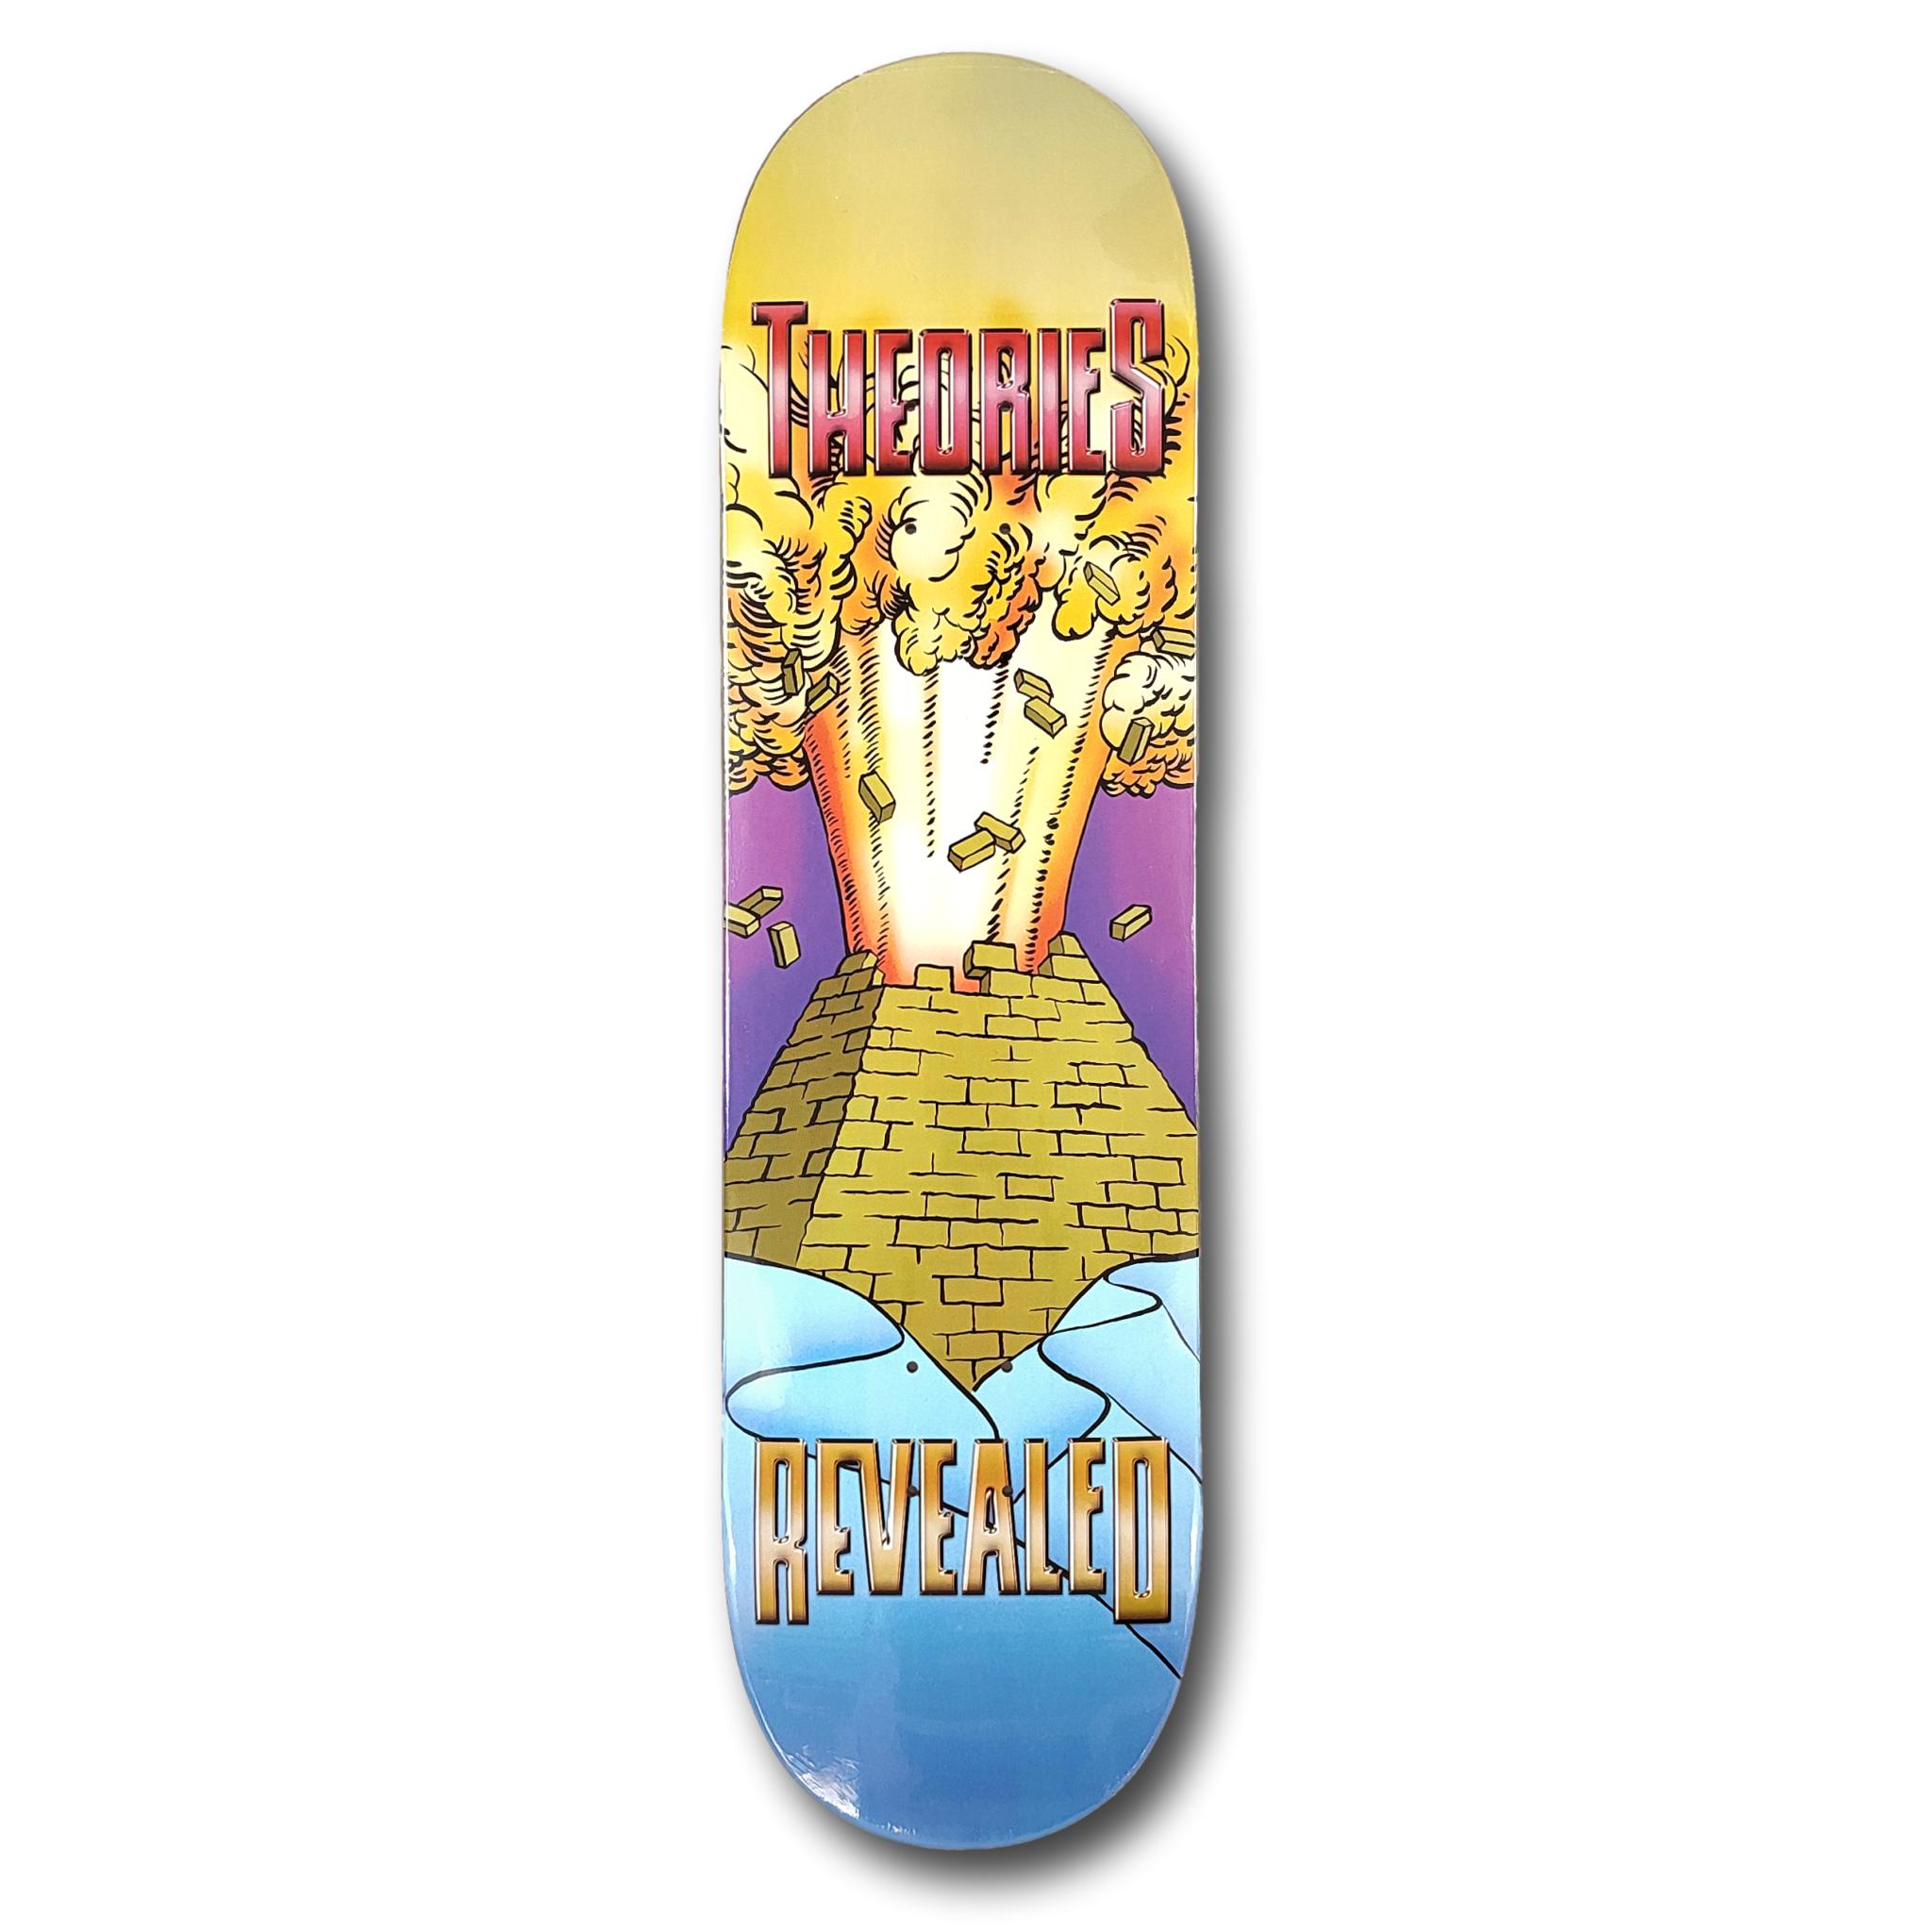 THEORIES SKATEBOARDS REVEALED DECK 8.0